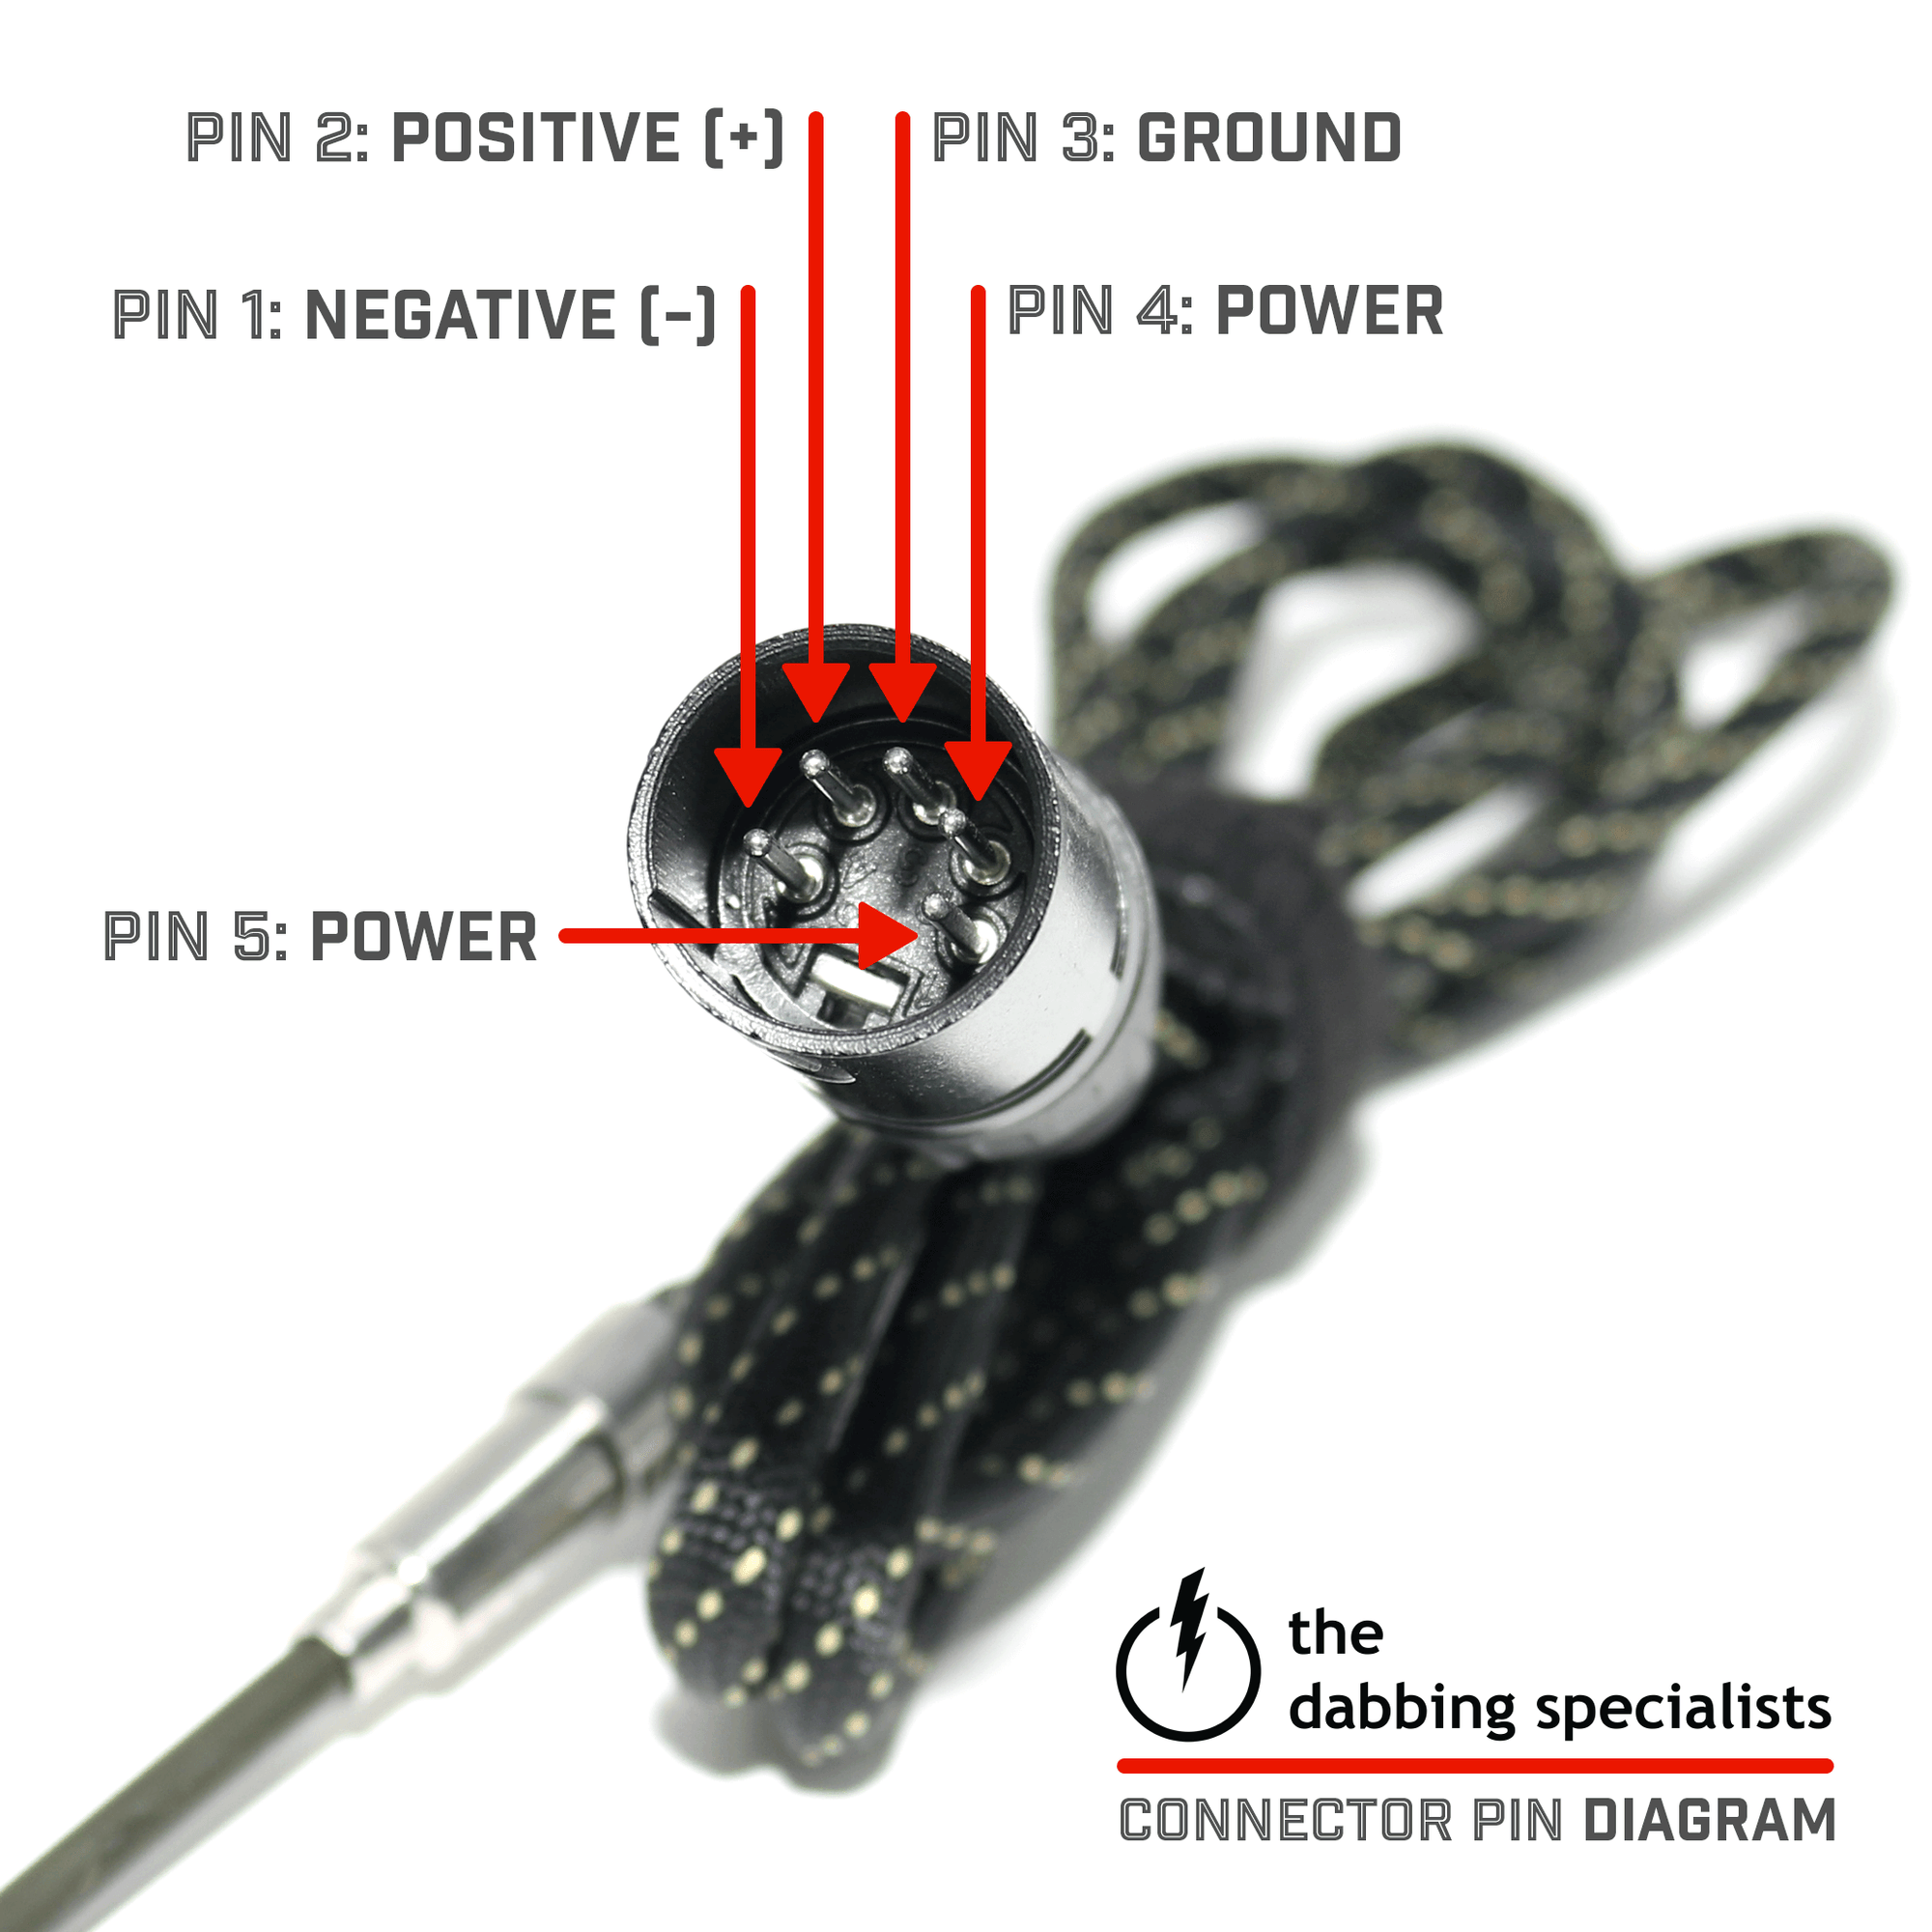 30mm Coil Heater for Enails and Dabbing | XLR Pin Connection Diagram View | Dabbing Warehouse